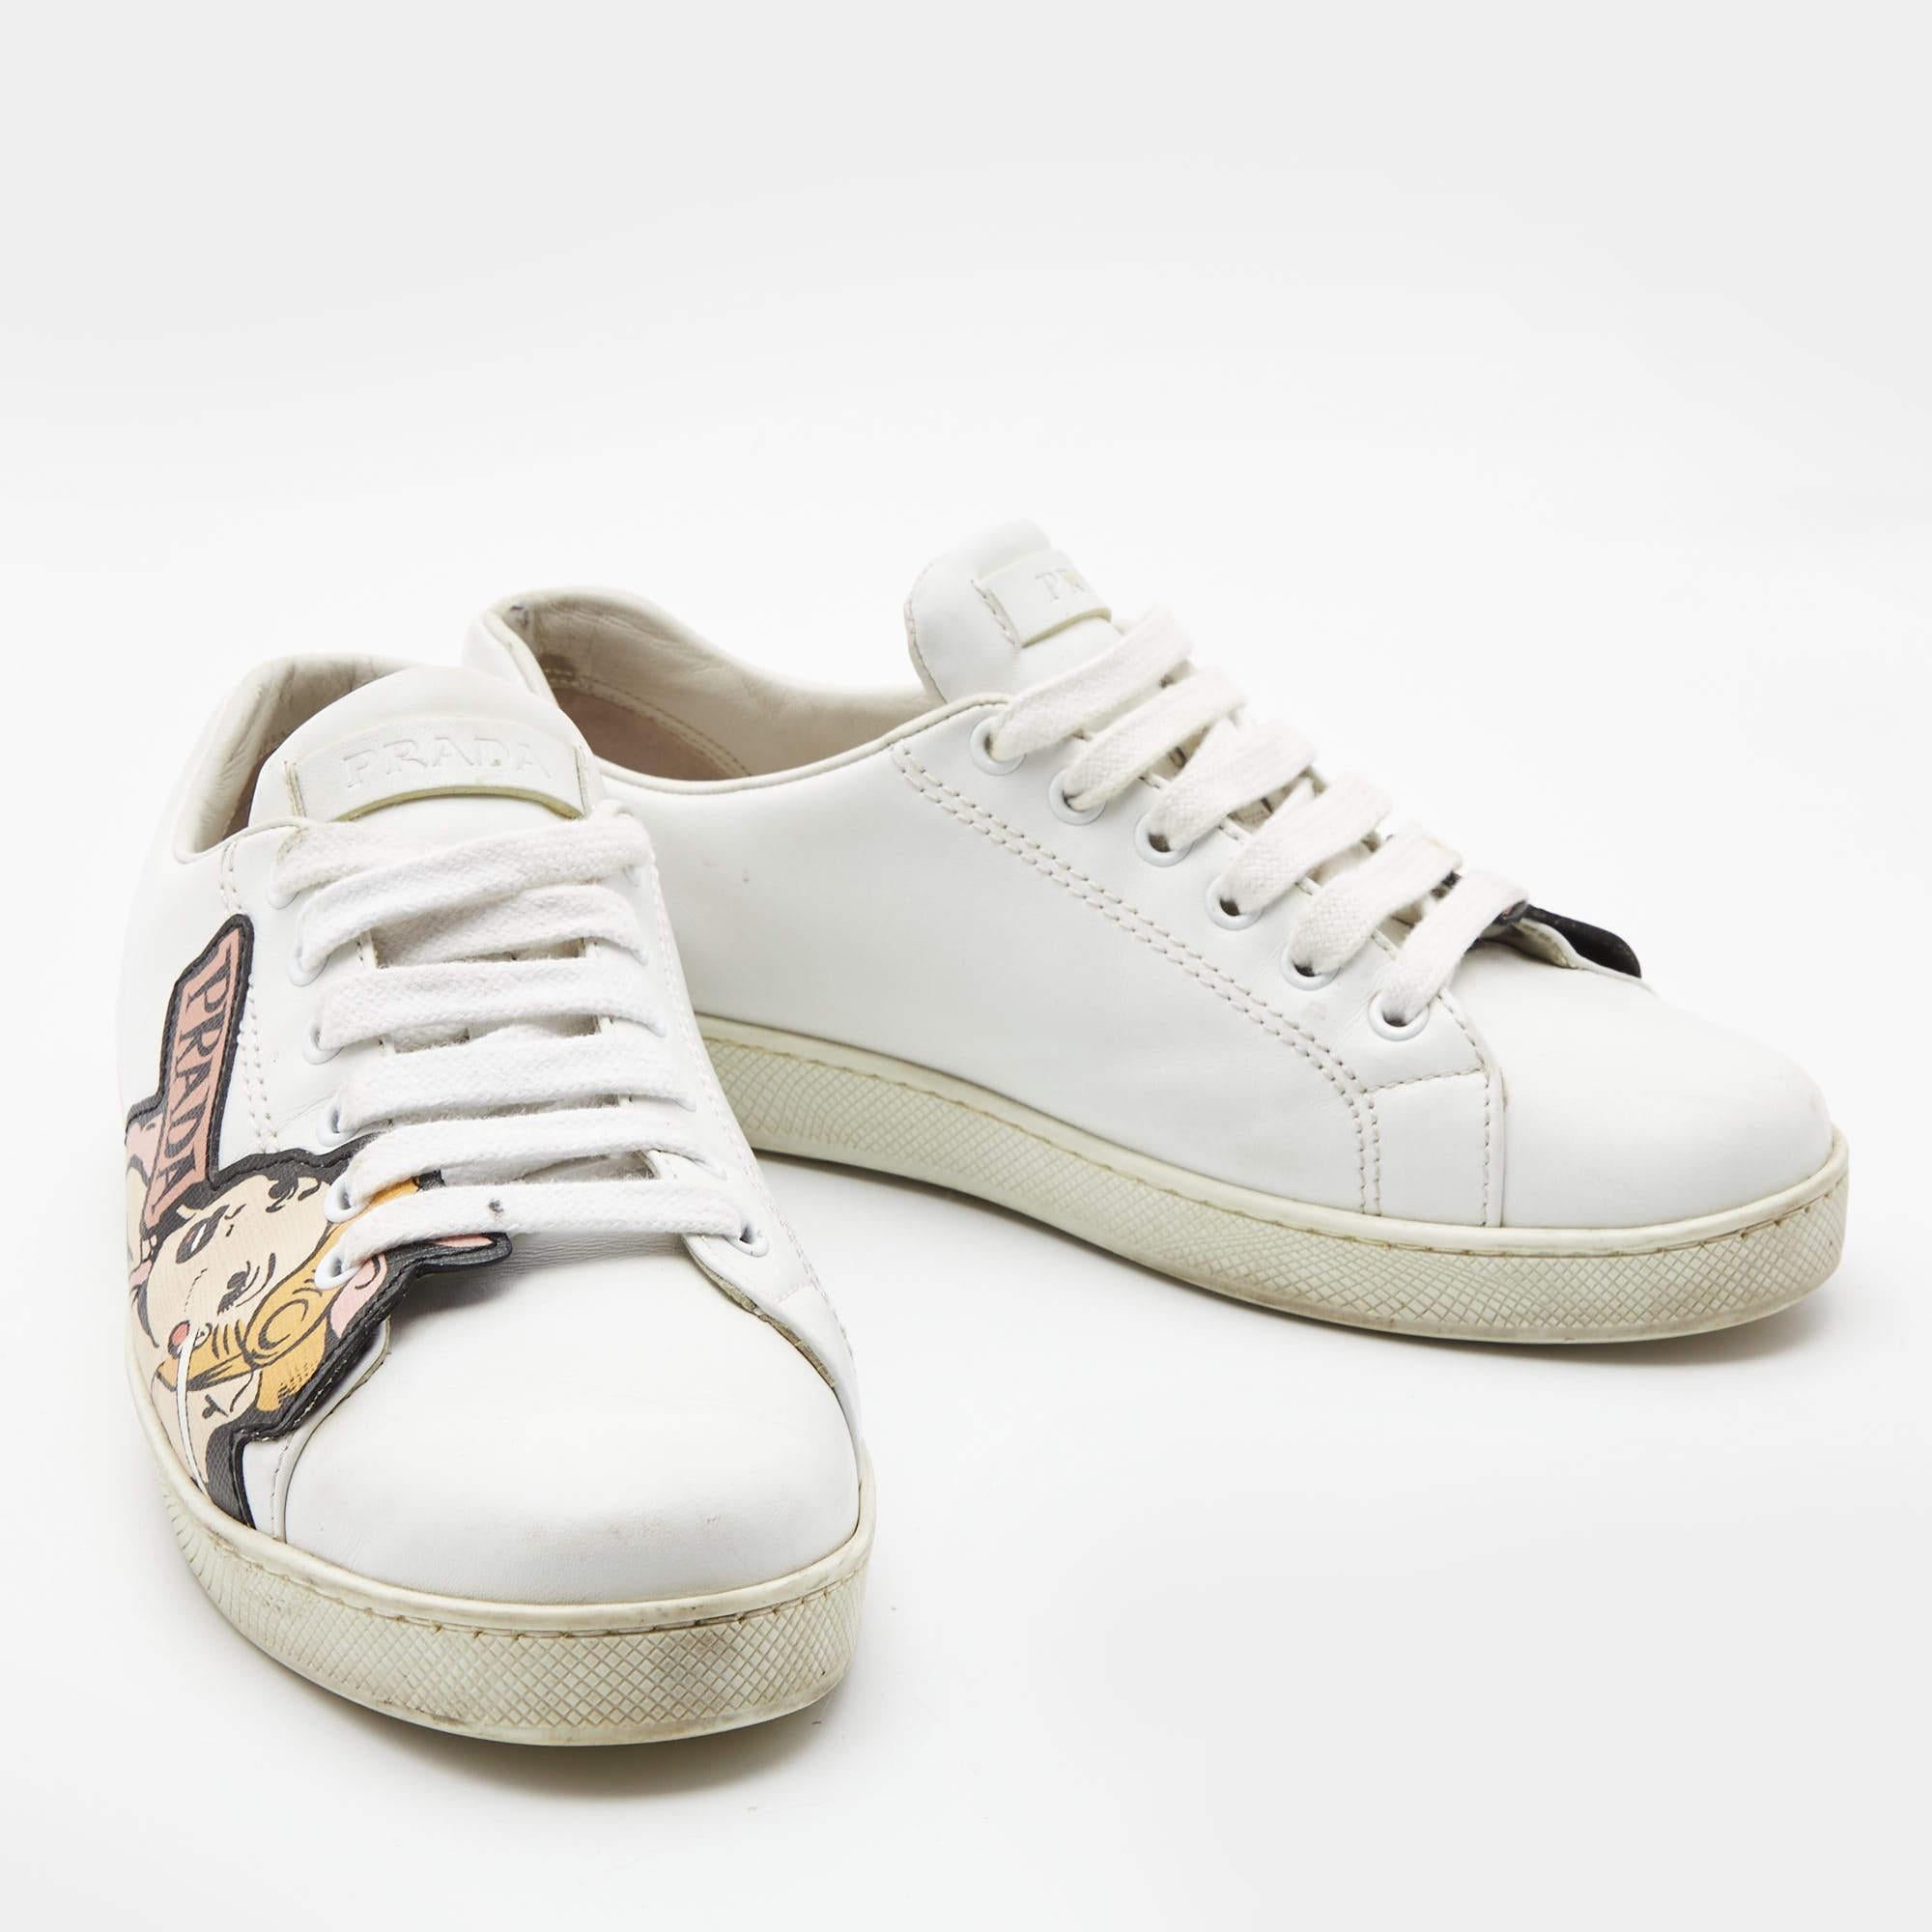 Women's Prada White Leather Patch Work Low Top Sneakers Size 39